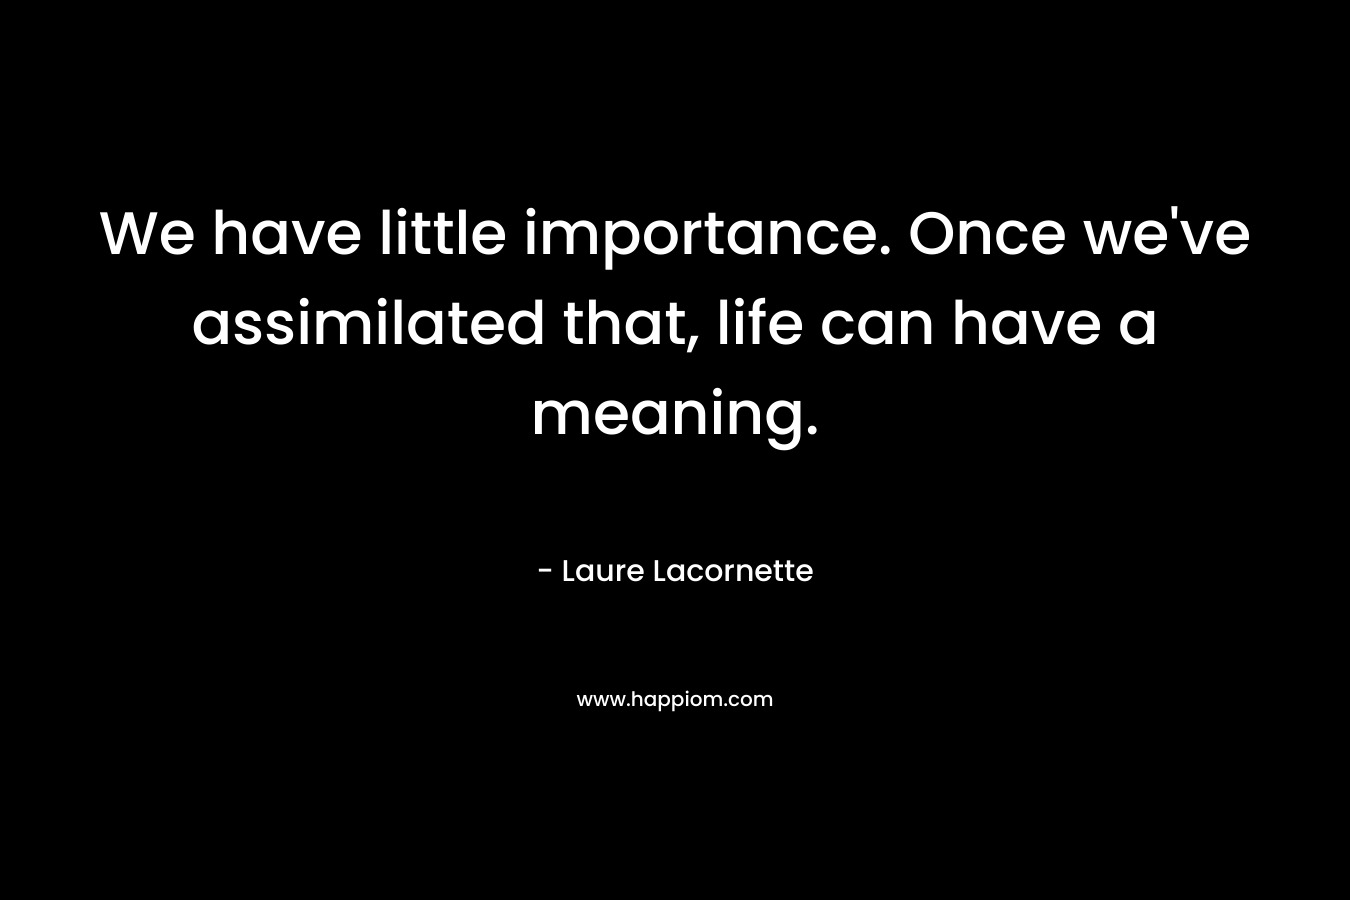 We have little importance. Once we've assimilated that, life can have a meaning.